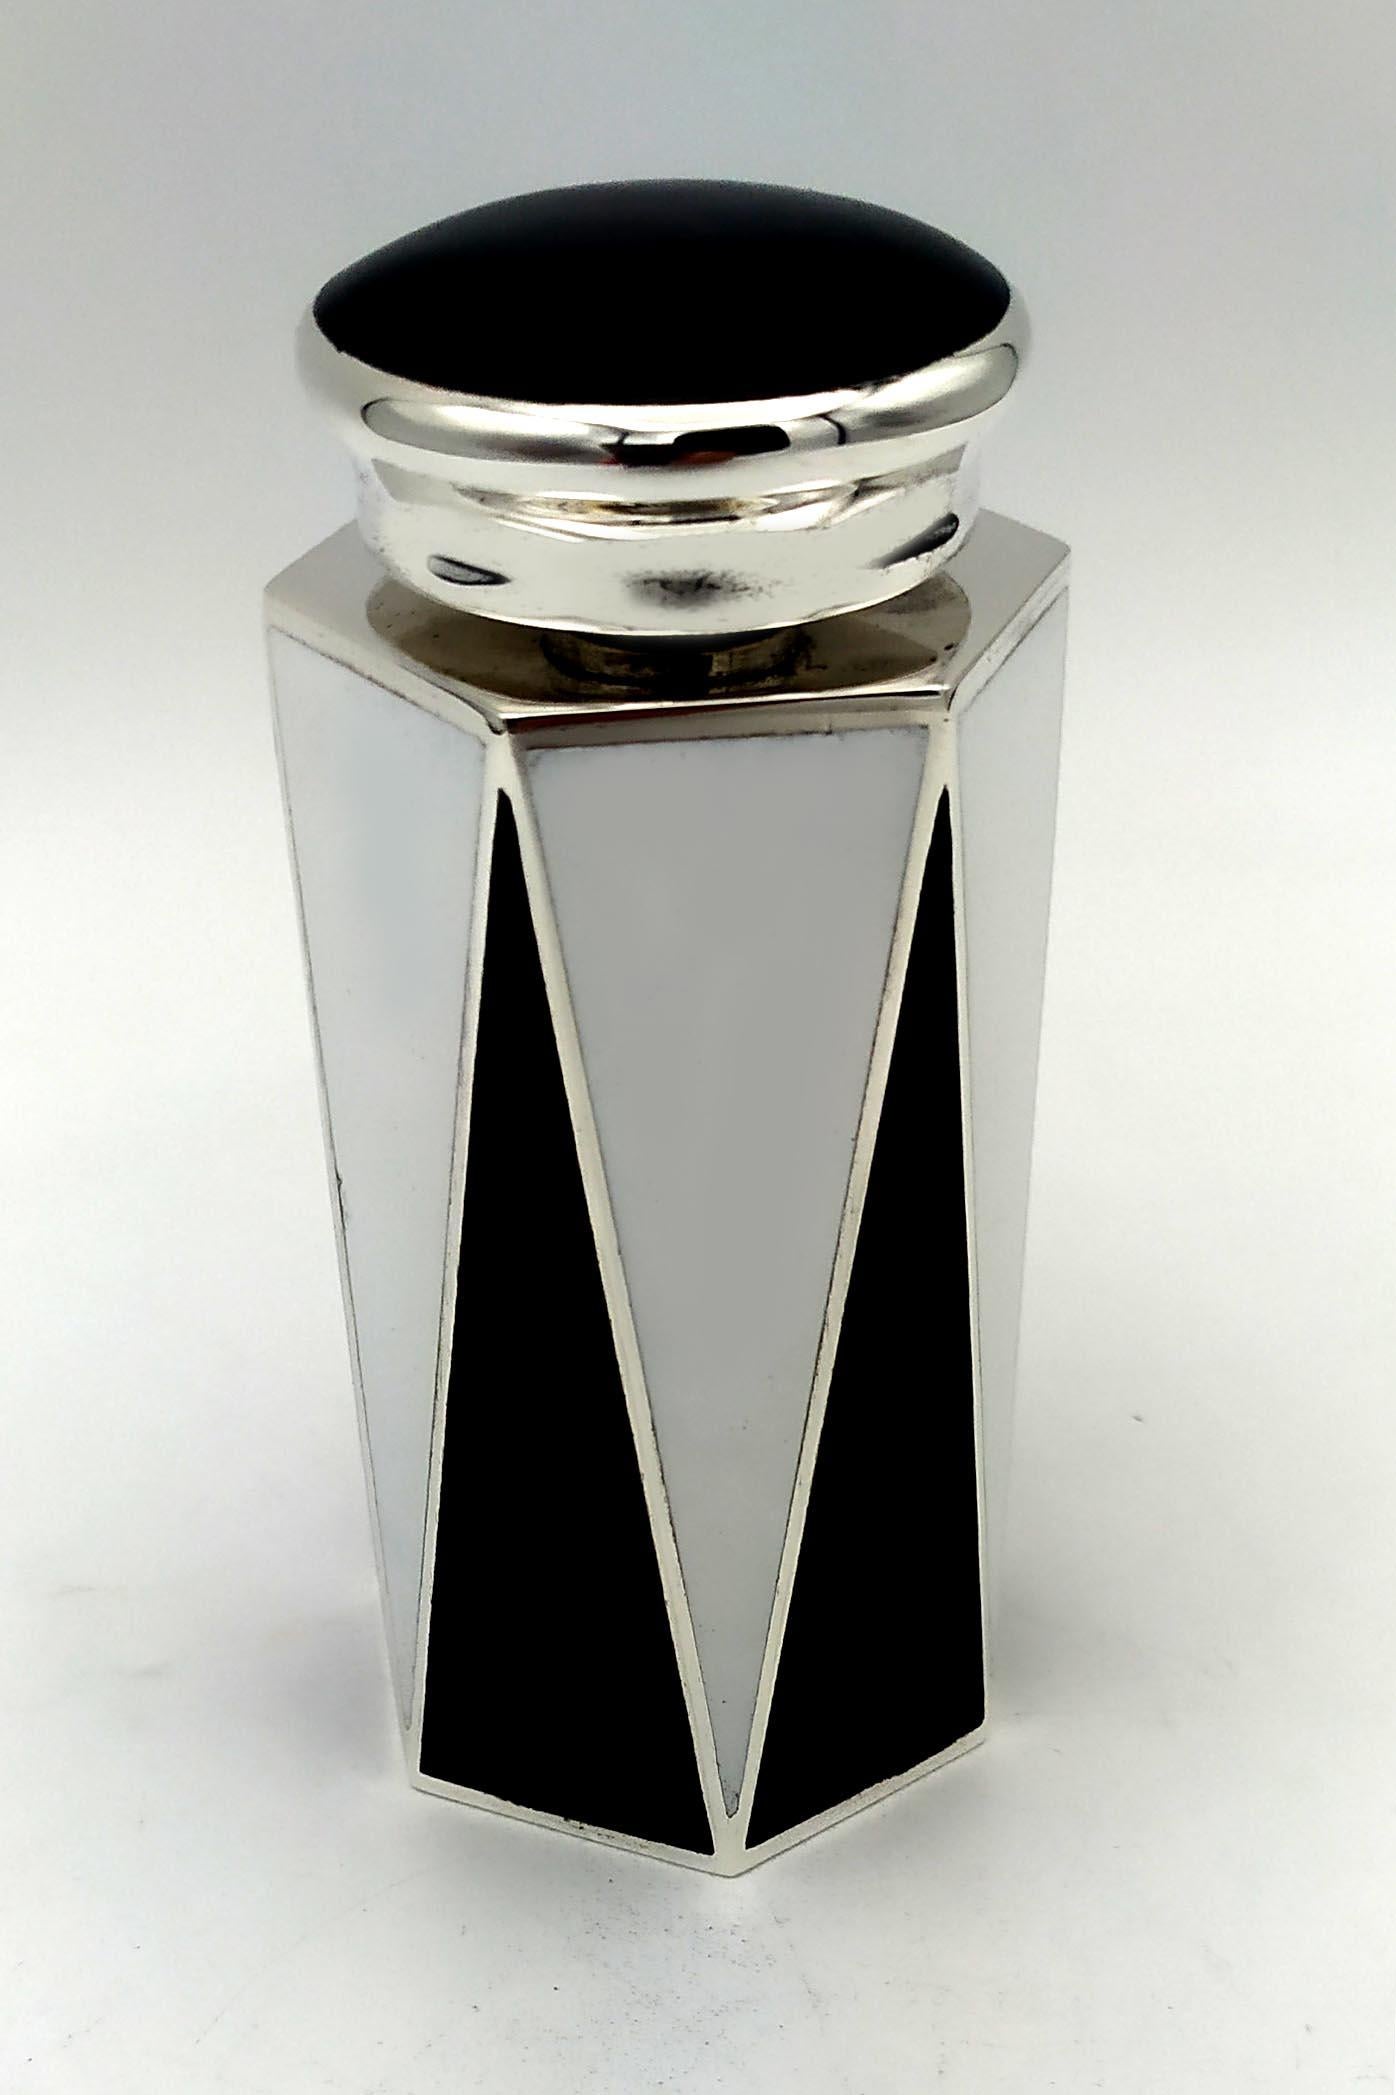 Hexagonal base perfume holder in black and white fired enamel 925/1000 sterling silver with screw cap, in Art Deco style. Base cm, 4.2 x 4.7 bottle height cm. 8, total height cm. 10.7. Silver weight gr. 187. Designed by Giorgio Salimbeni in 1981 and